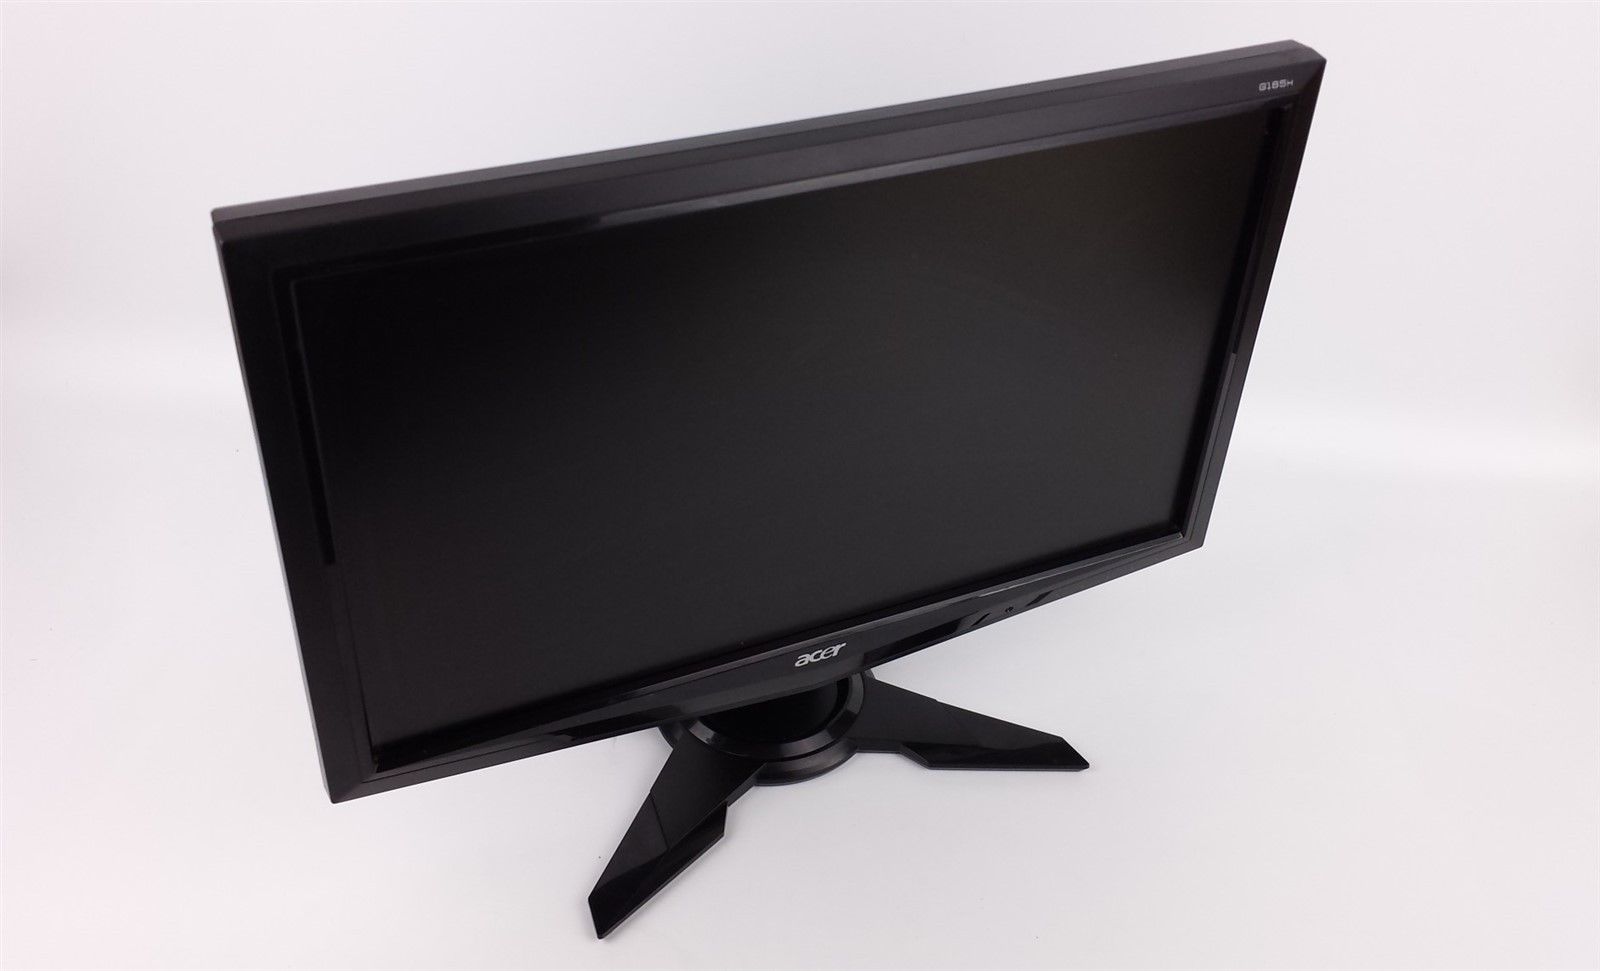 Acer Display G433H LCD Computer Monitor 18.5" with Power and VGA Cord